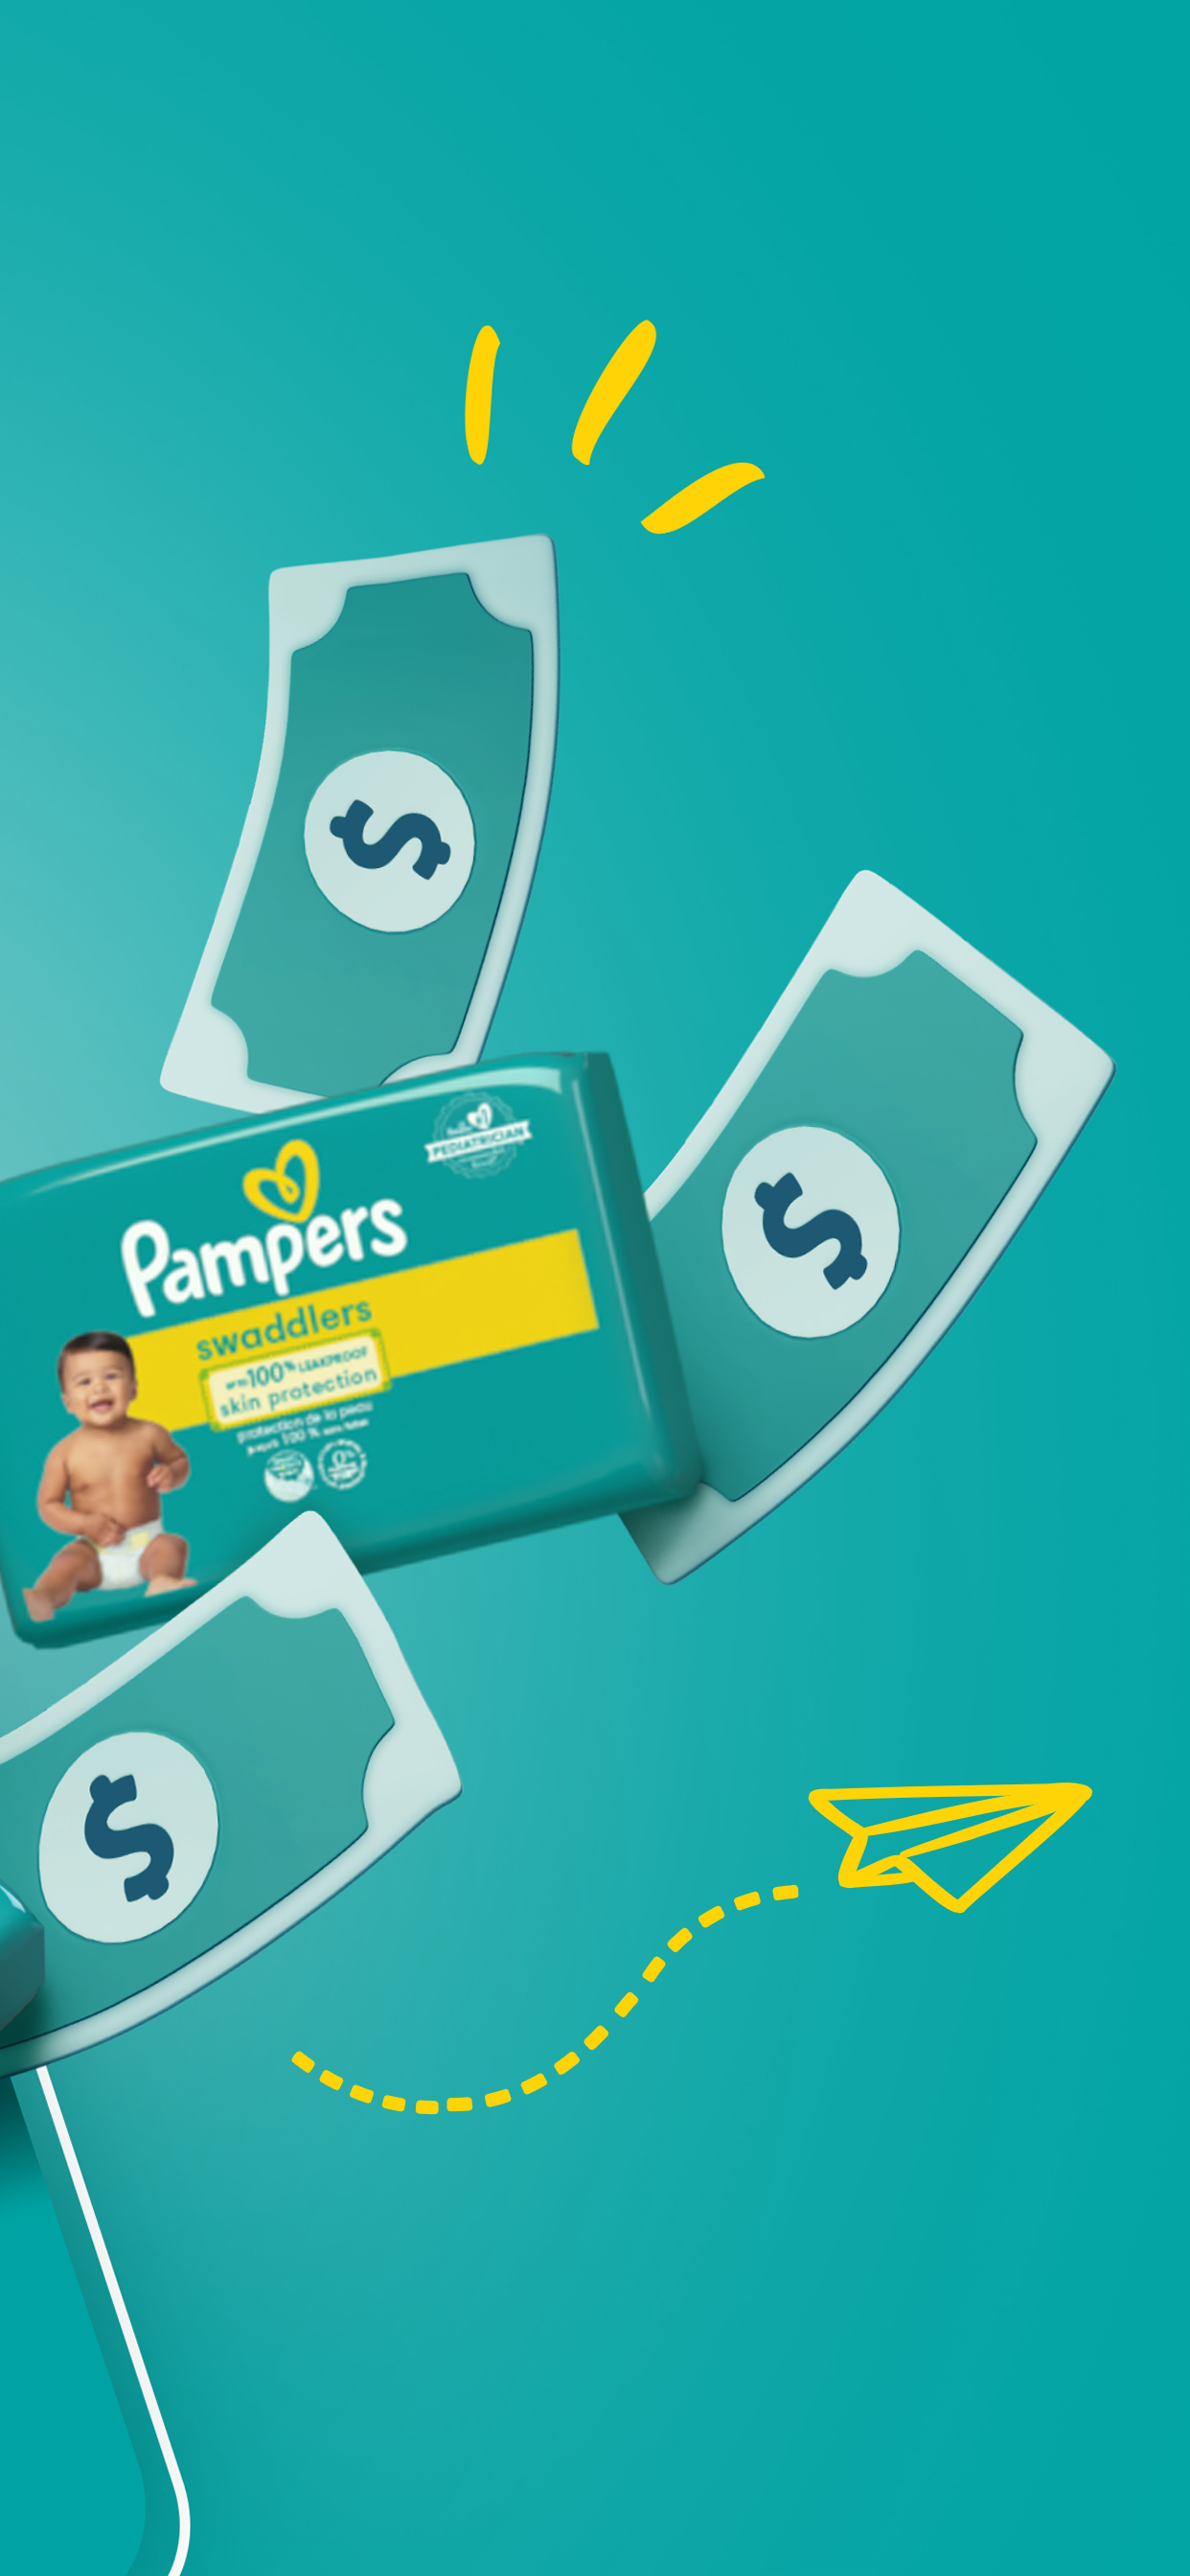 anty pampers clu